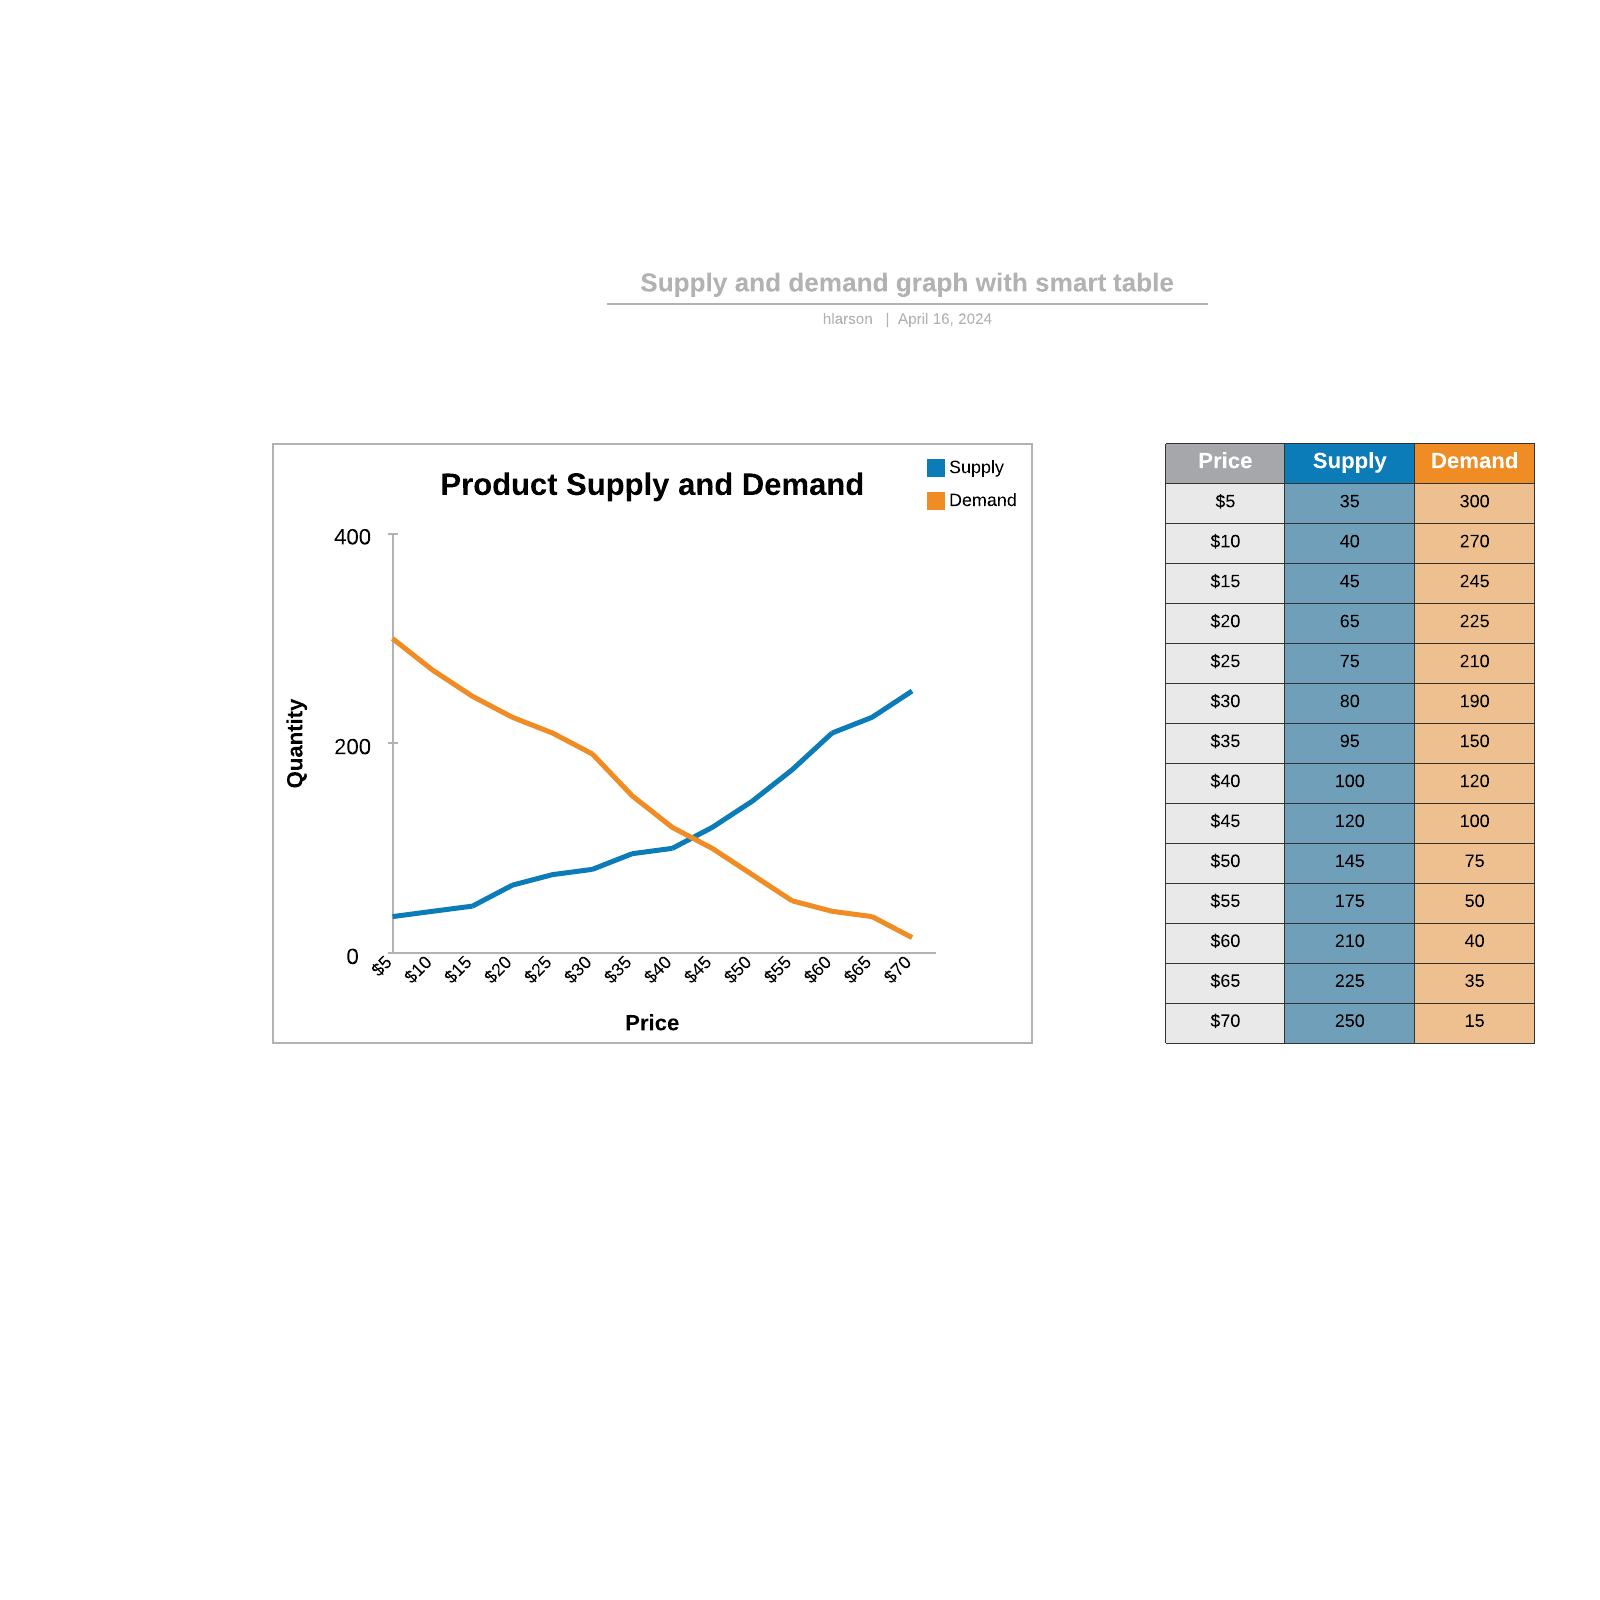 Supply and demand graph with smart table example